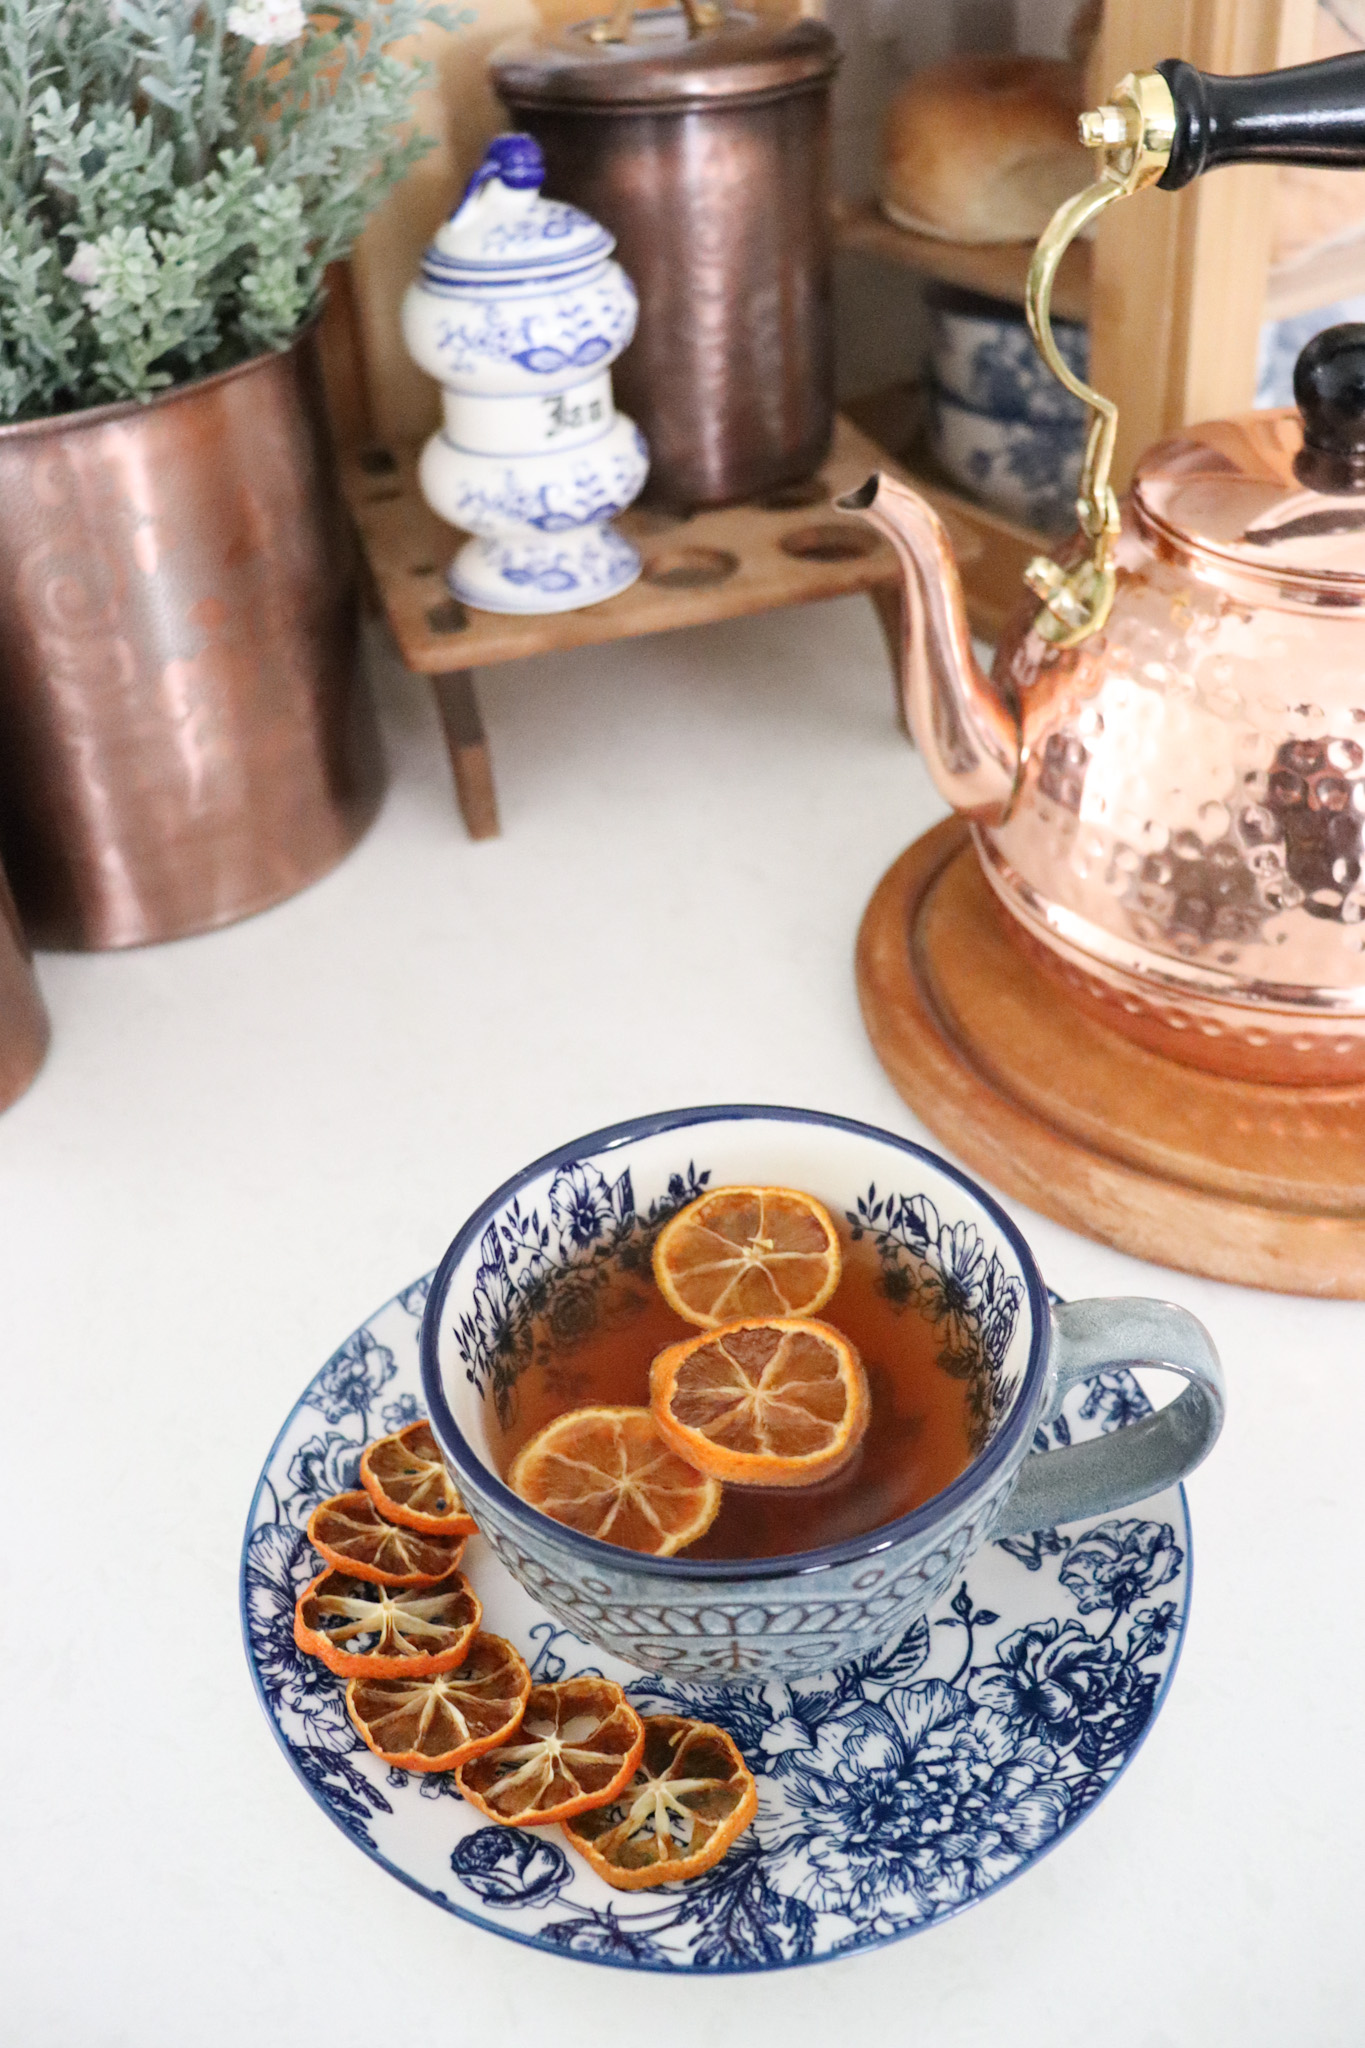 Drinking a hot cup of orange tea from blue and white floral dishes.